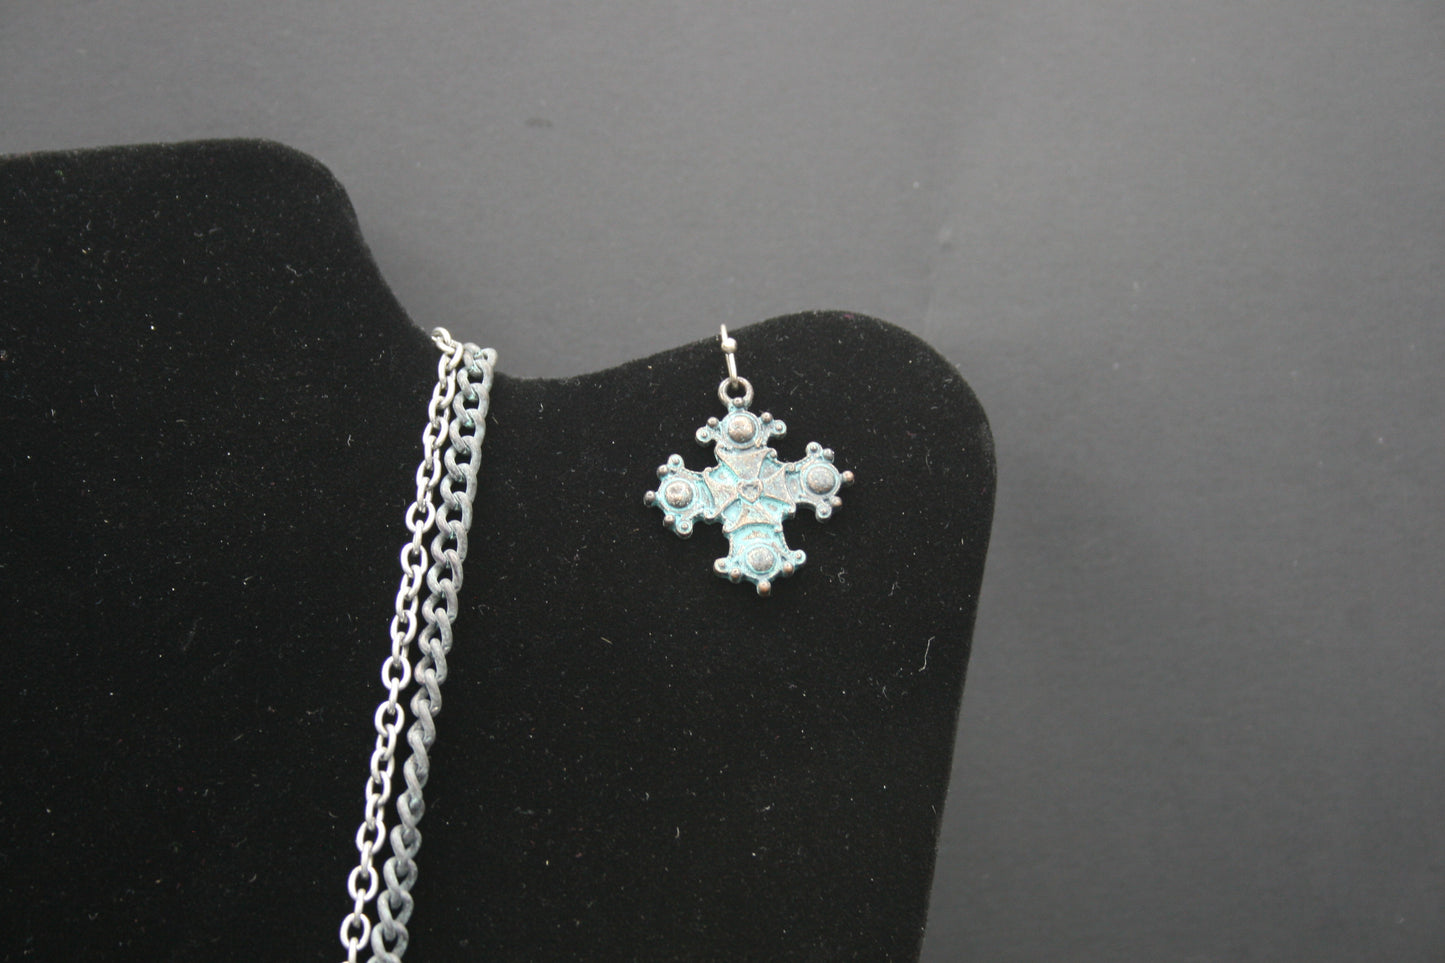 Turquoise Abstract Cross Necklace and Earring Set